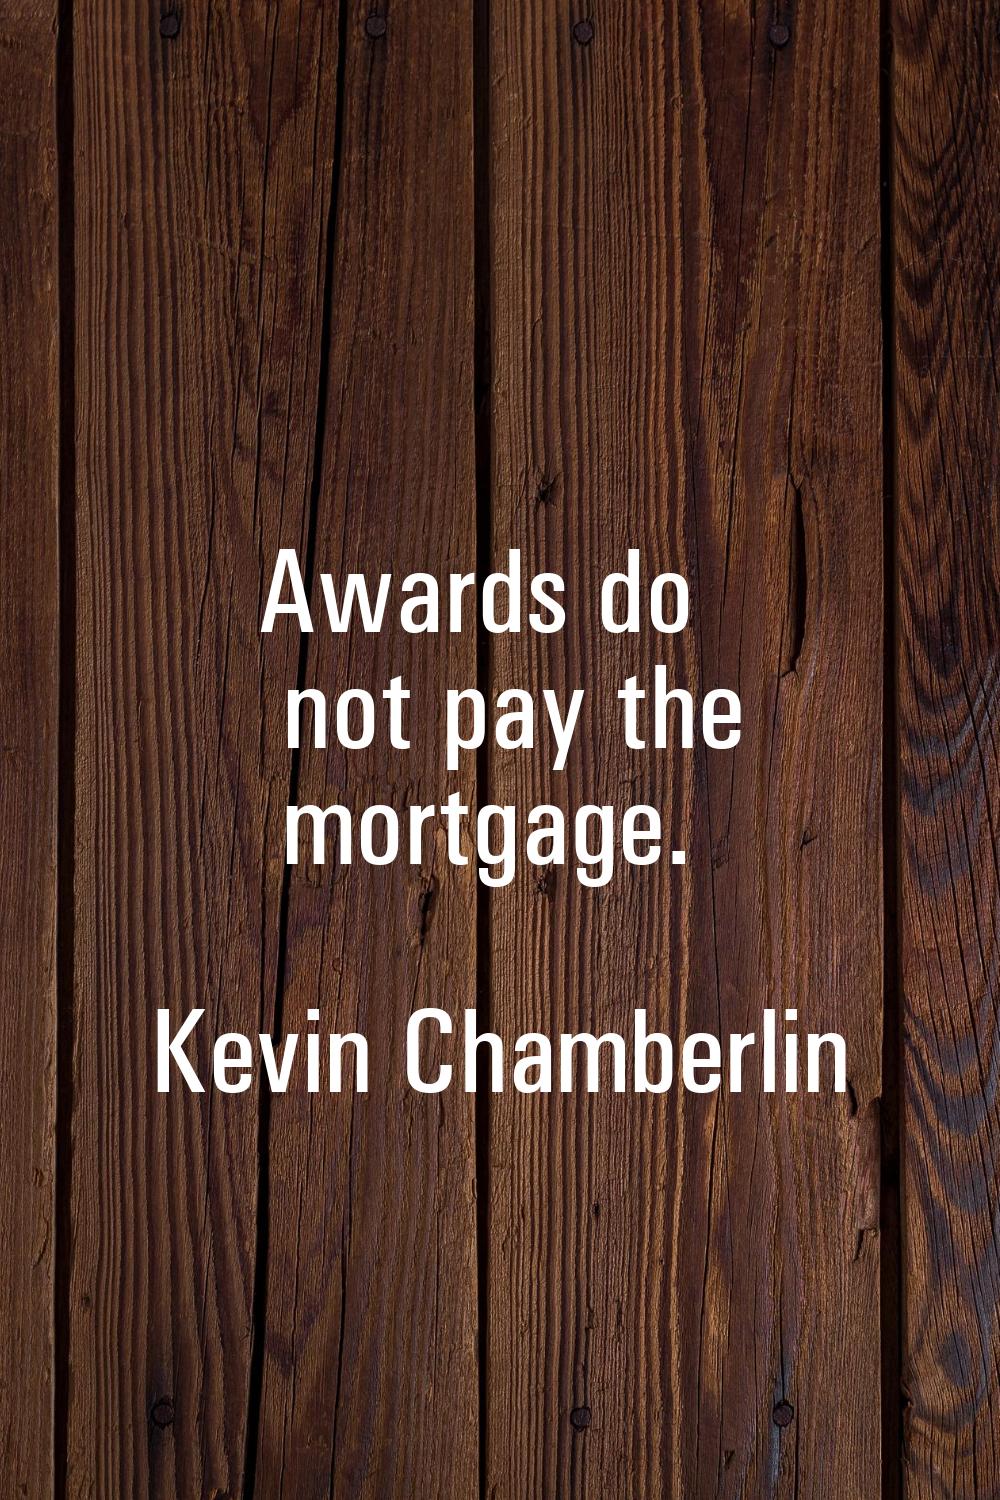 Awards do not pay the mortgage.